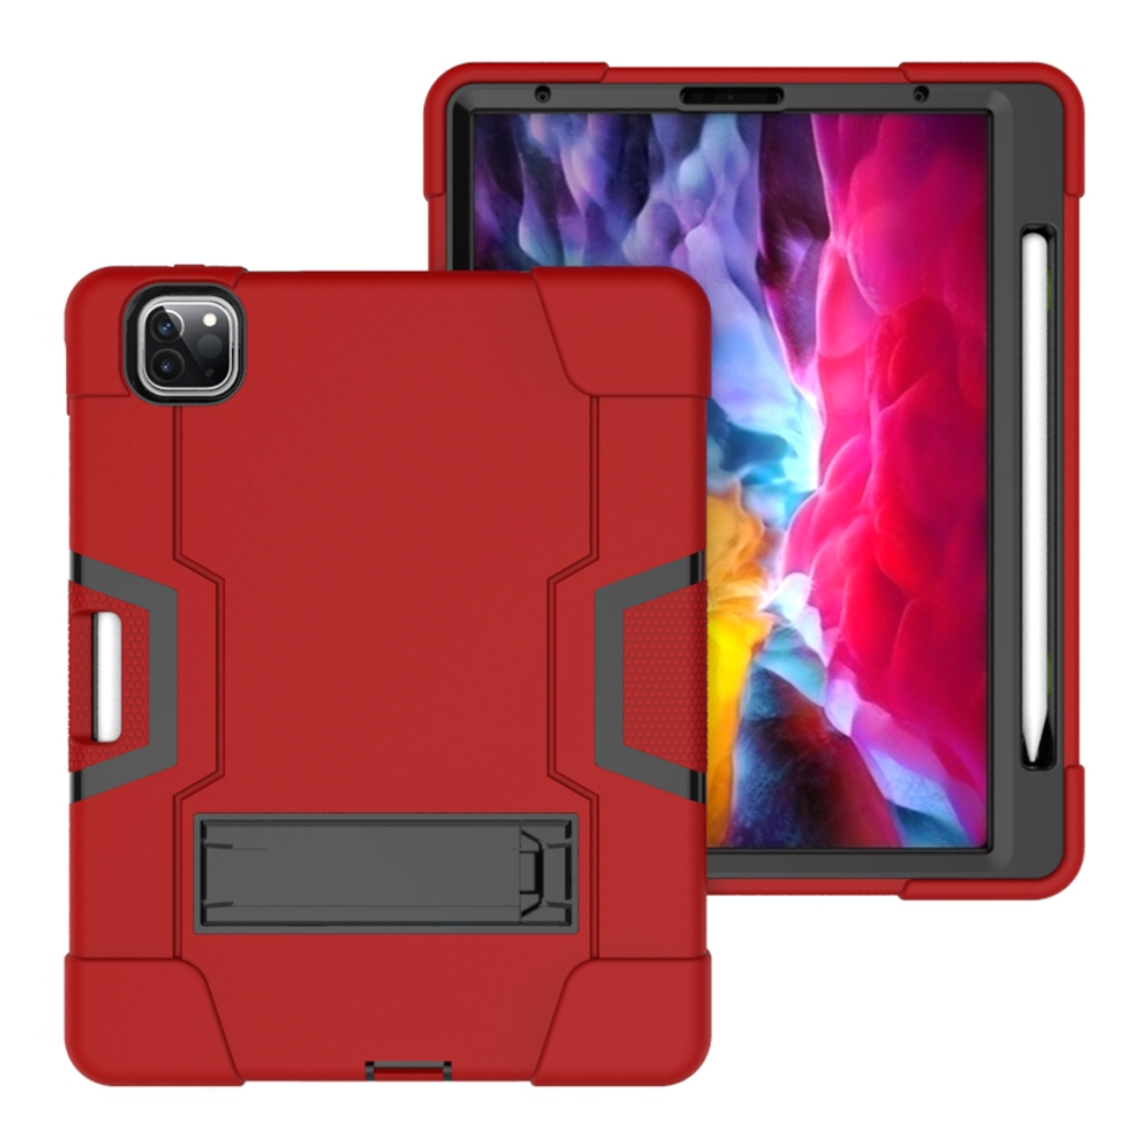 For Samsung Galaxy Tab S6 Lite 10.4" 2020 P610 / P615 Hard Case Survivor with Stand Red